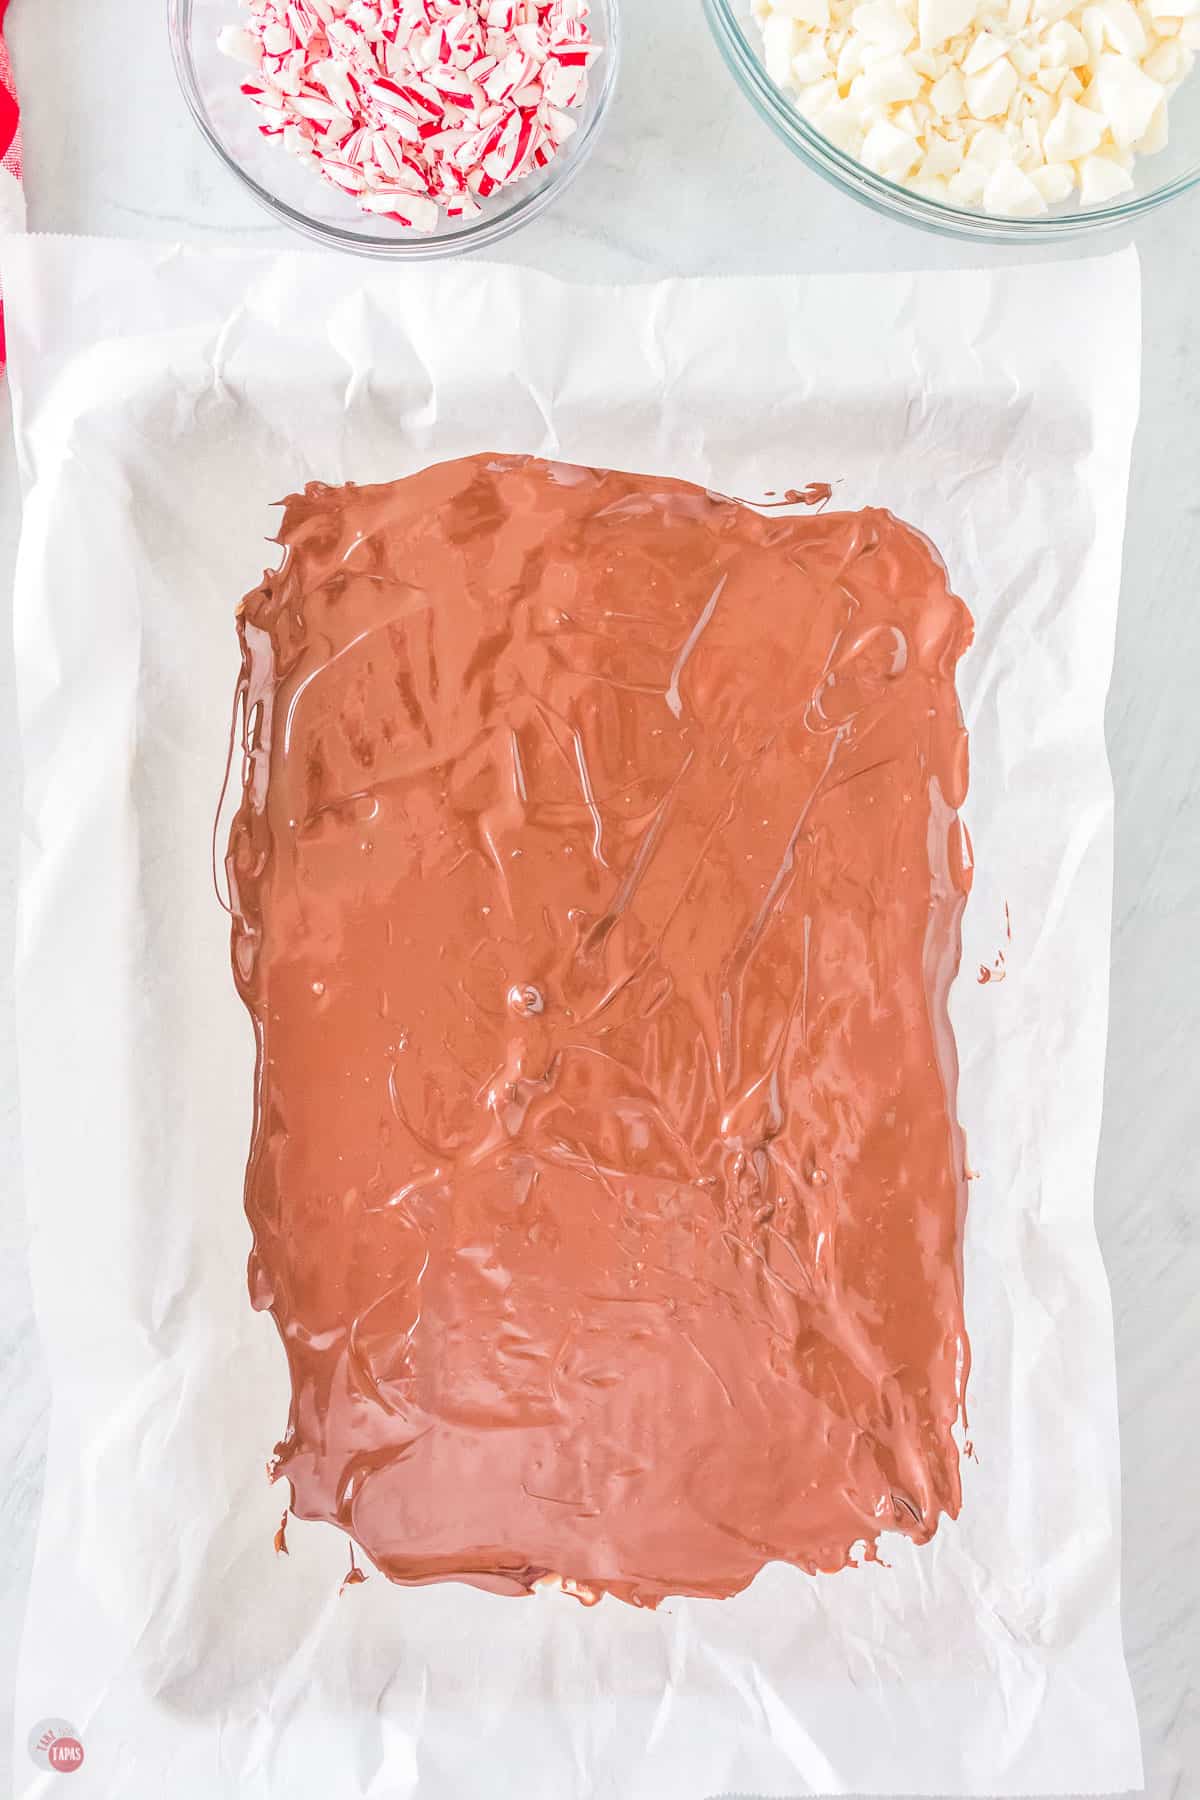 melted milk chocolate on parchment paper